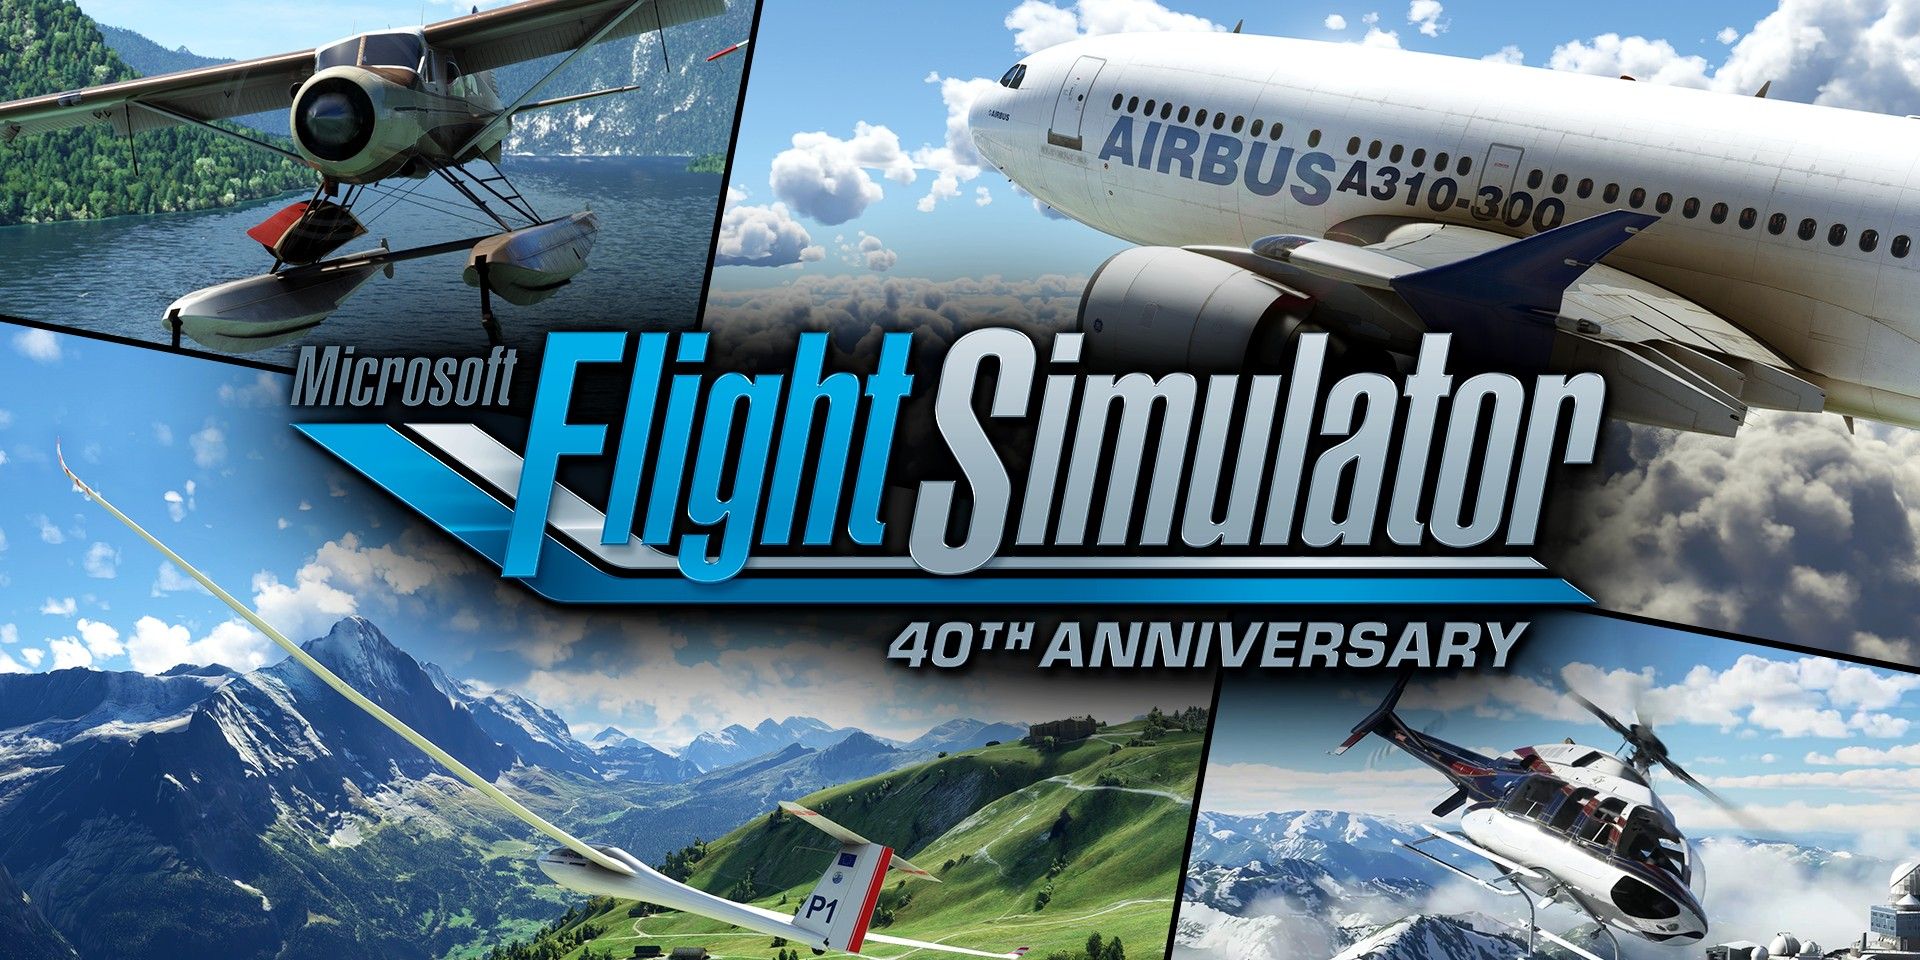 Promotional image featuring some of the new aircraft available in Microsoft Flight Simulator 40th Anniversary Edition.